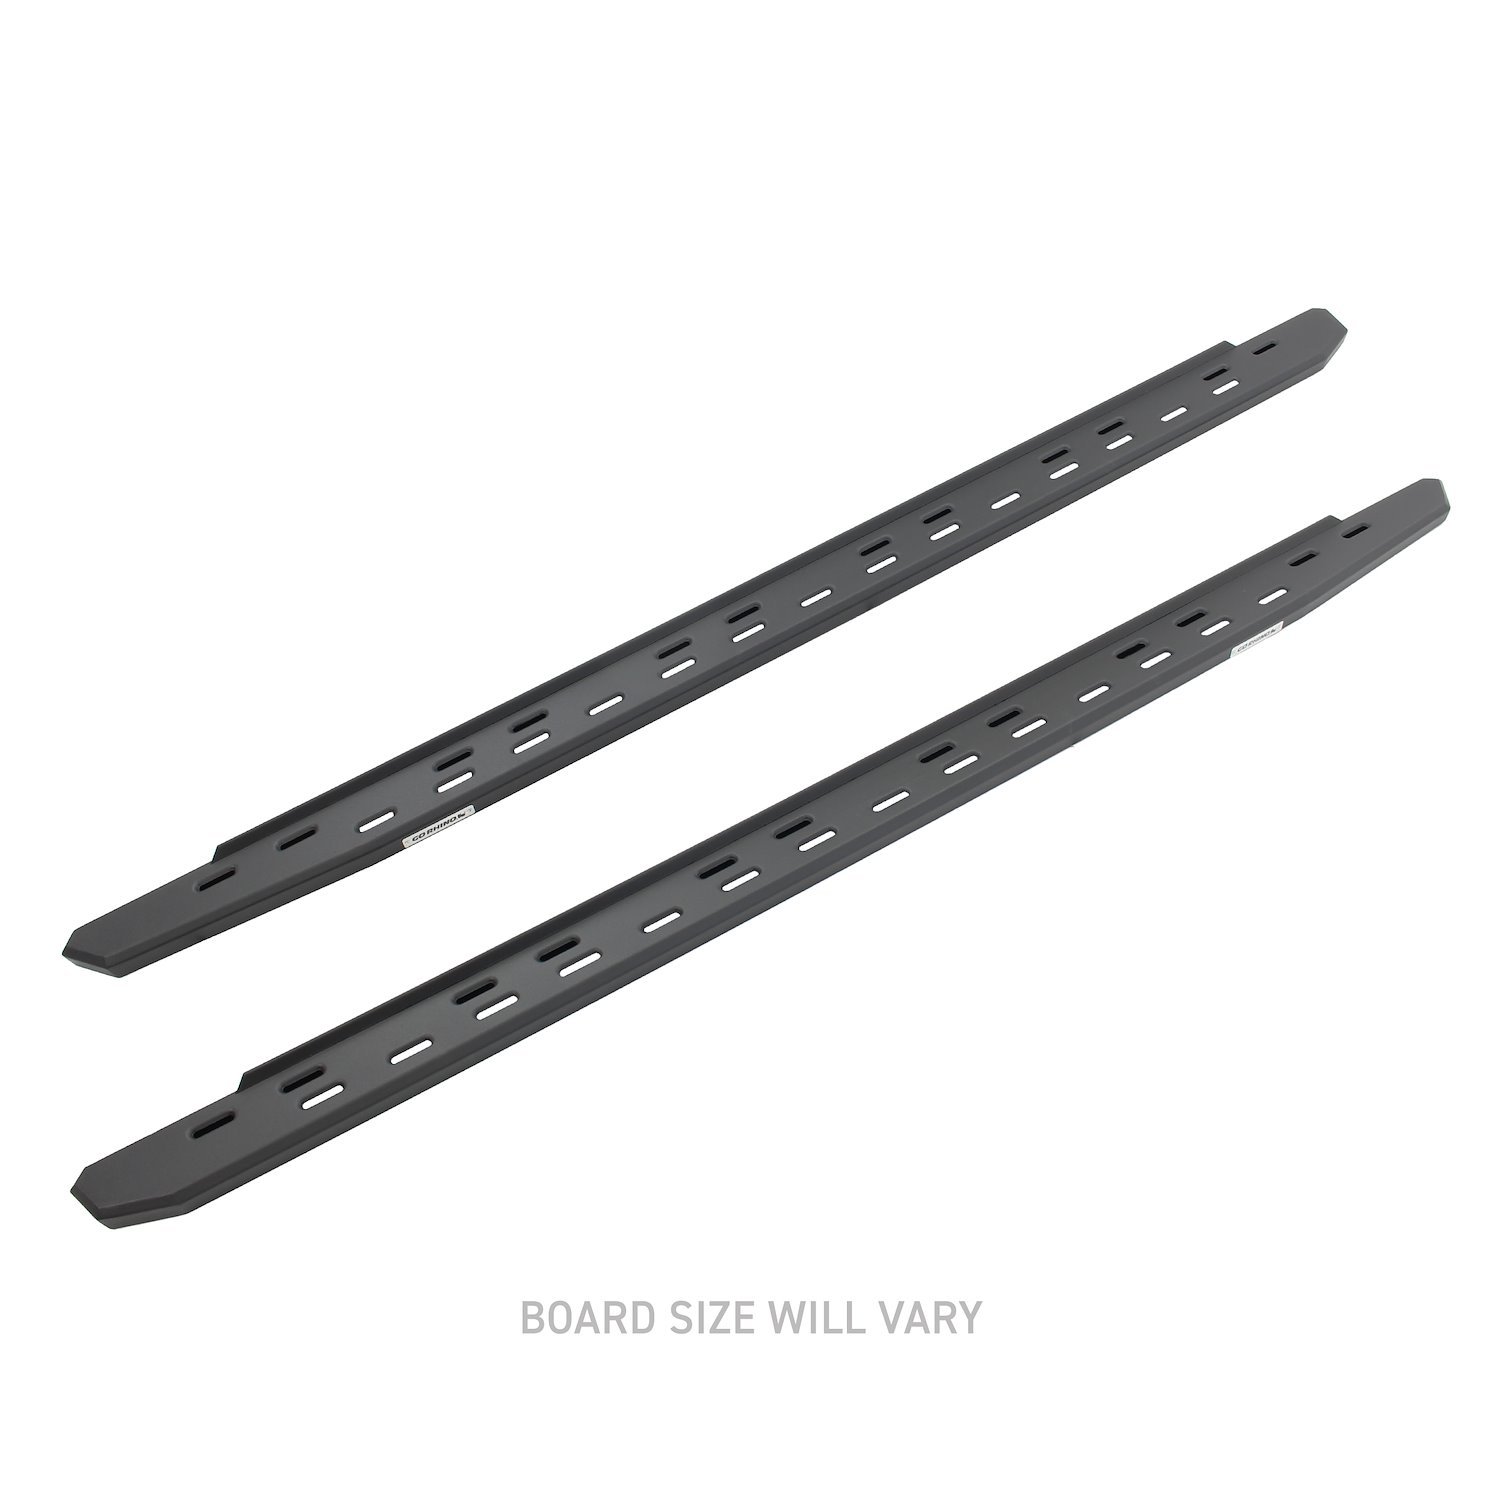 RB30 Slim Line Running Boards w/Bracket Kit Fits Select Chevy Colorado, GMC Canyon Crew Cab [Textured Black]